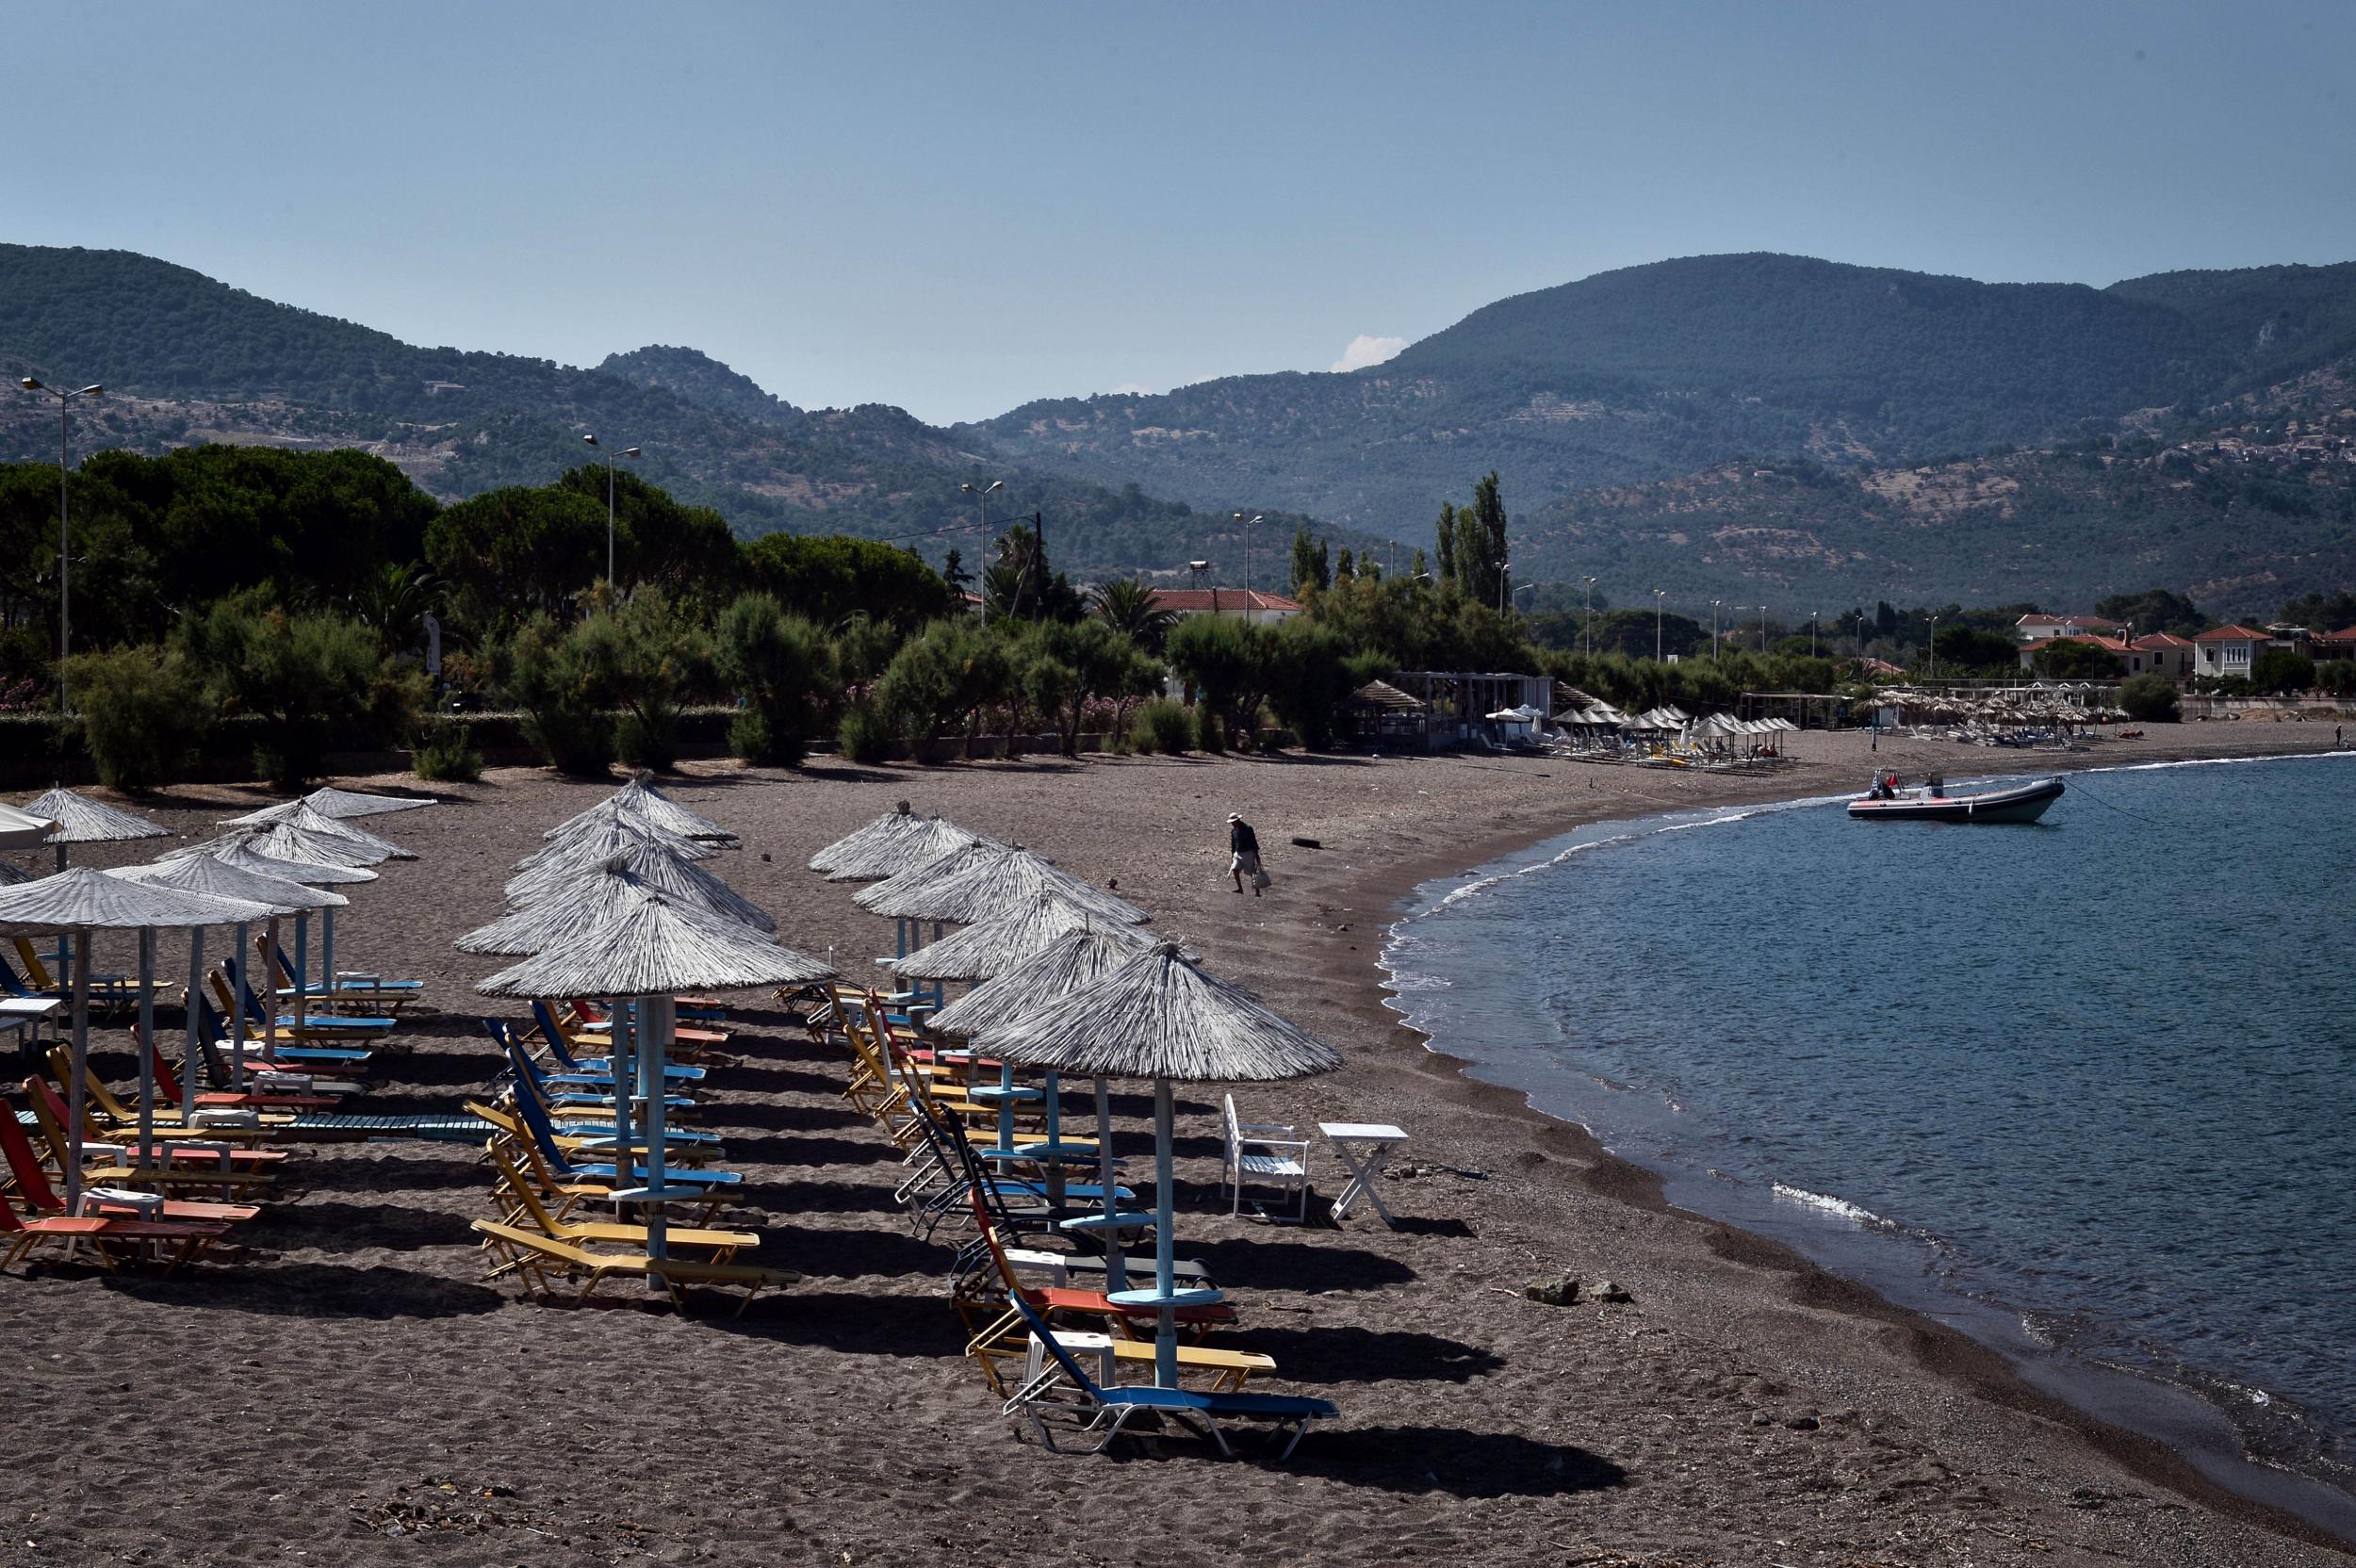 Sunbeds near the village of Molyvos on Lesbos last month. A year ago, before the refugee crisis, this beach would have been crowded with holidaymakers